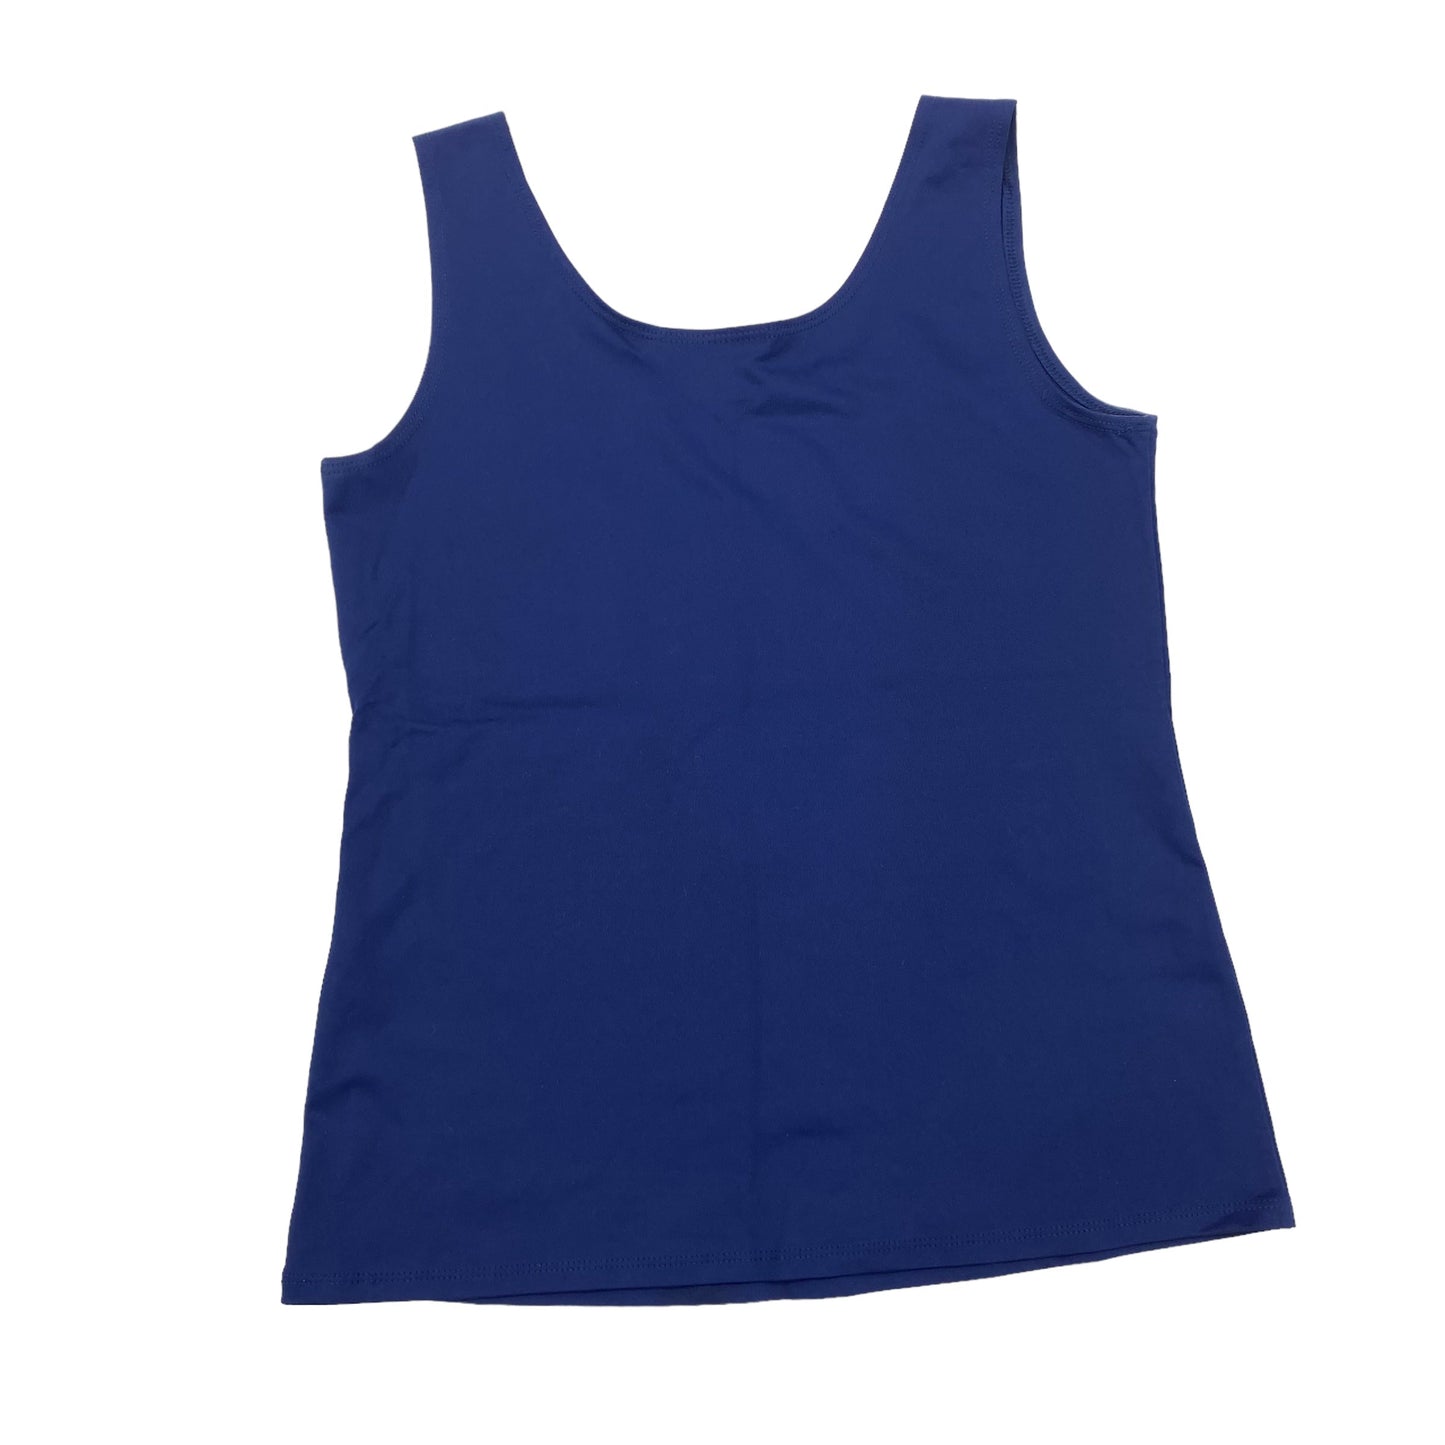 BLUE CHICOS TANK TOP, Size S